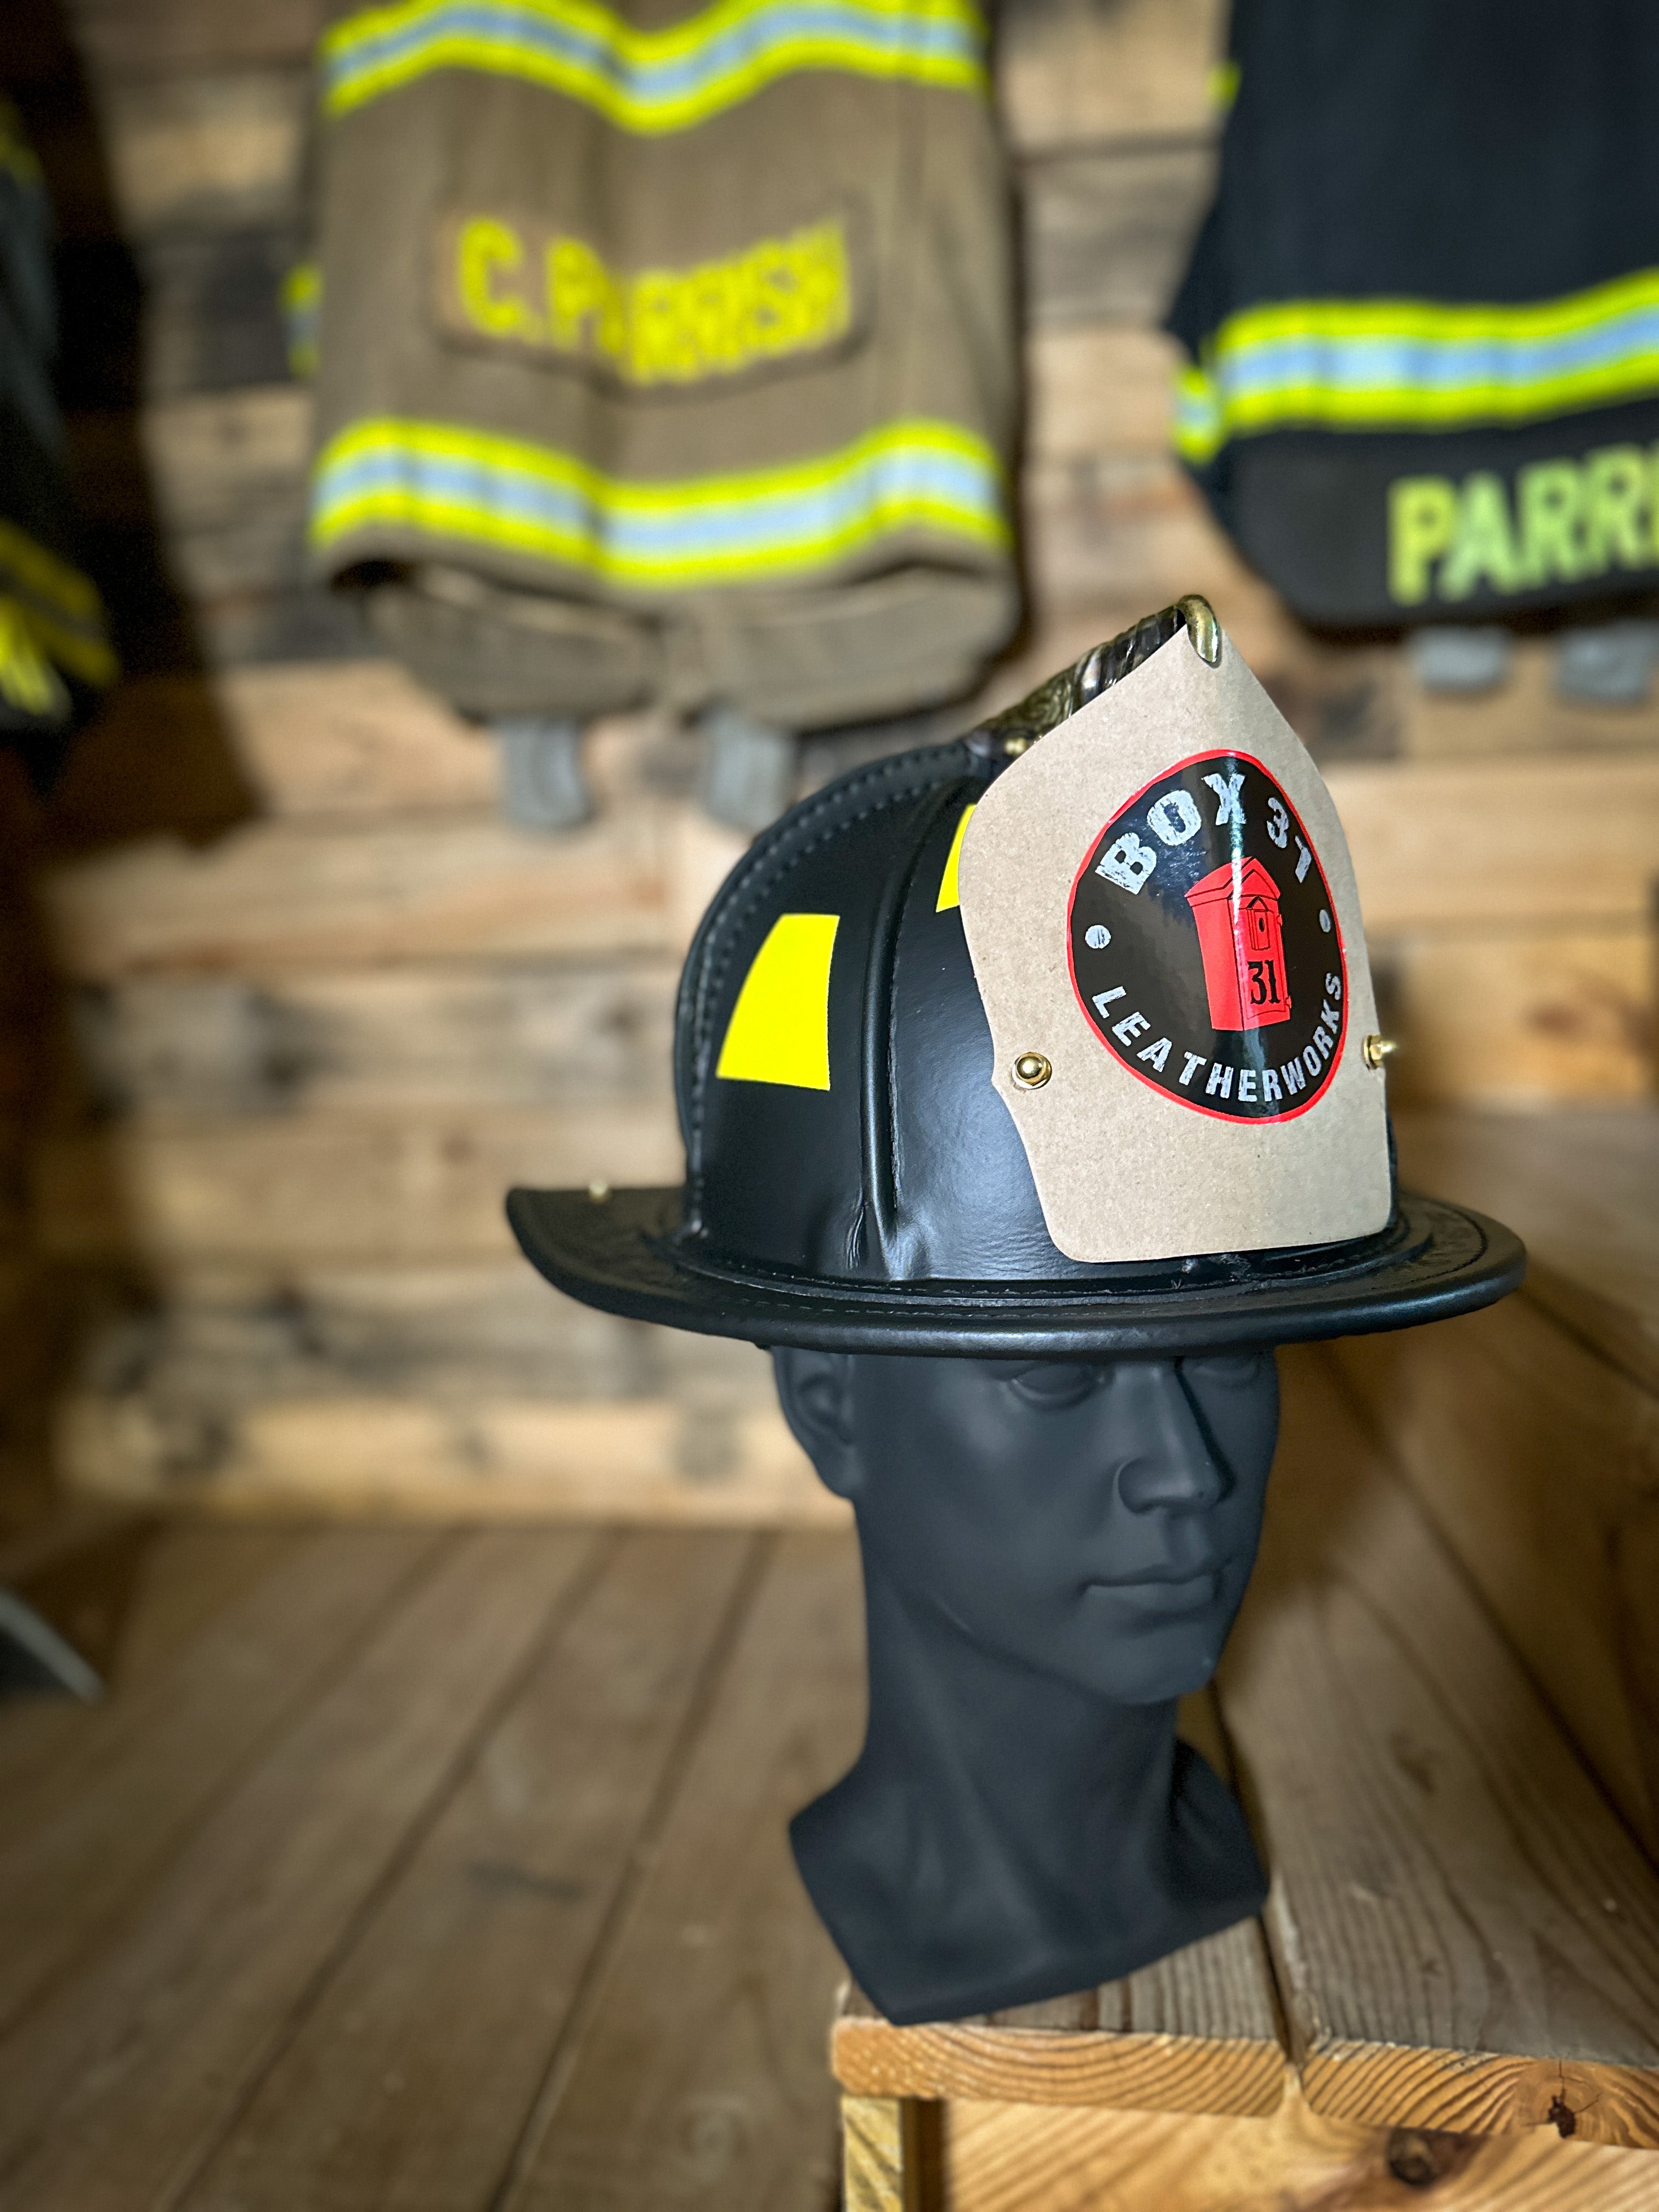 Phenix TL-2  Leather Helmet - Flat Black Phenix Bend (NFPA) with ESS Goggles and Deluxe Leather Comfort Package